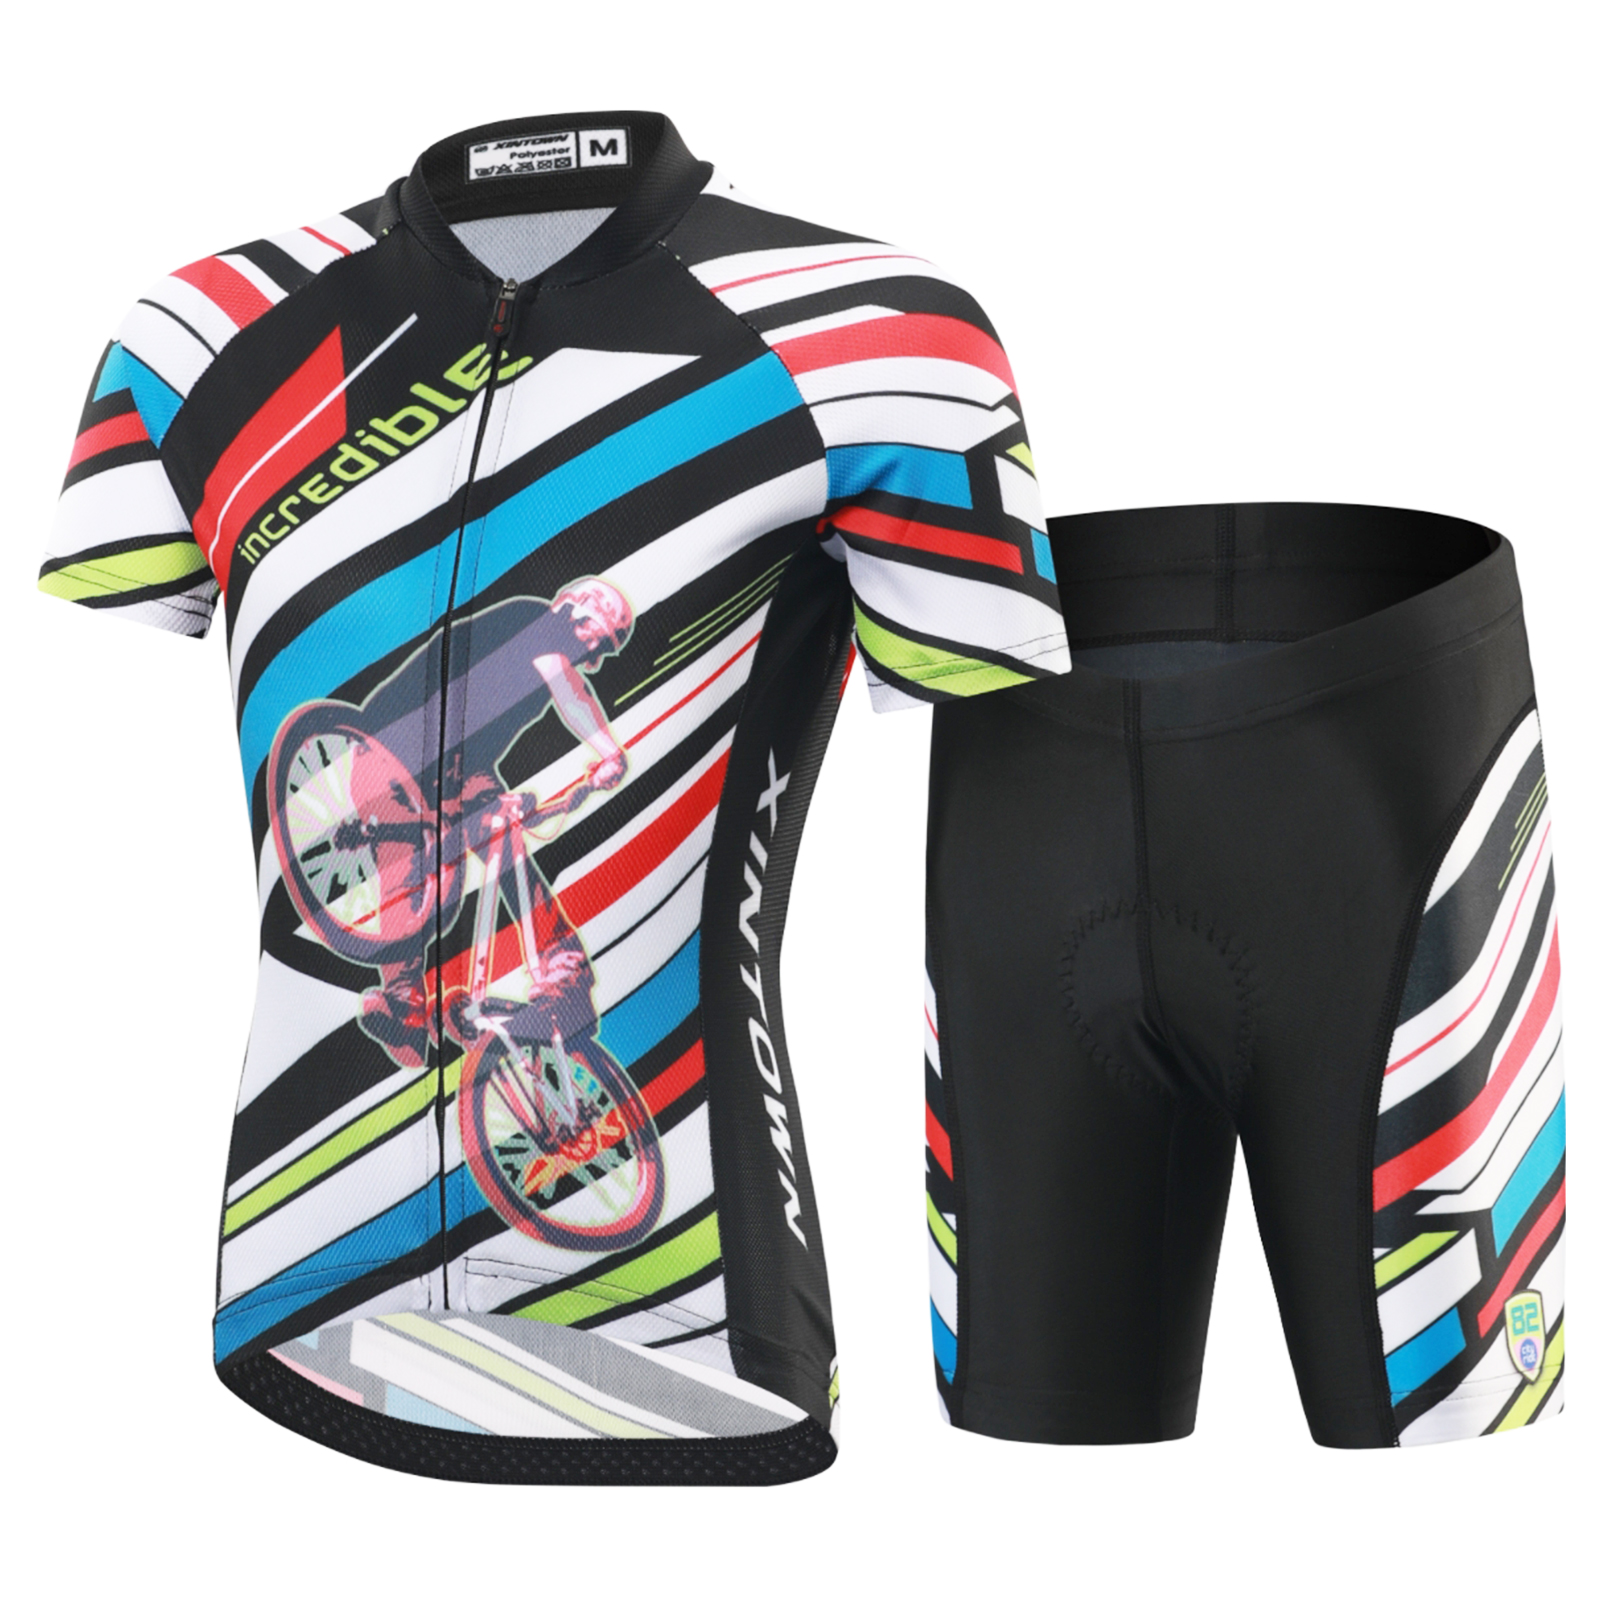 FREE FISHER Cycling Jersey Set for Children Short Sleeve Cartoon Print Quick Dry Boys Girls Bike Wear MTB Road Riding Bicycle Tops Shorts Set